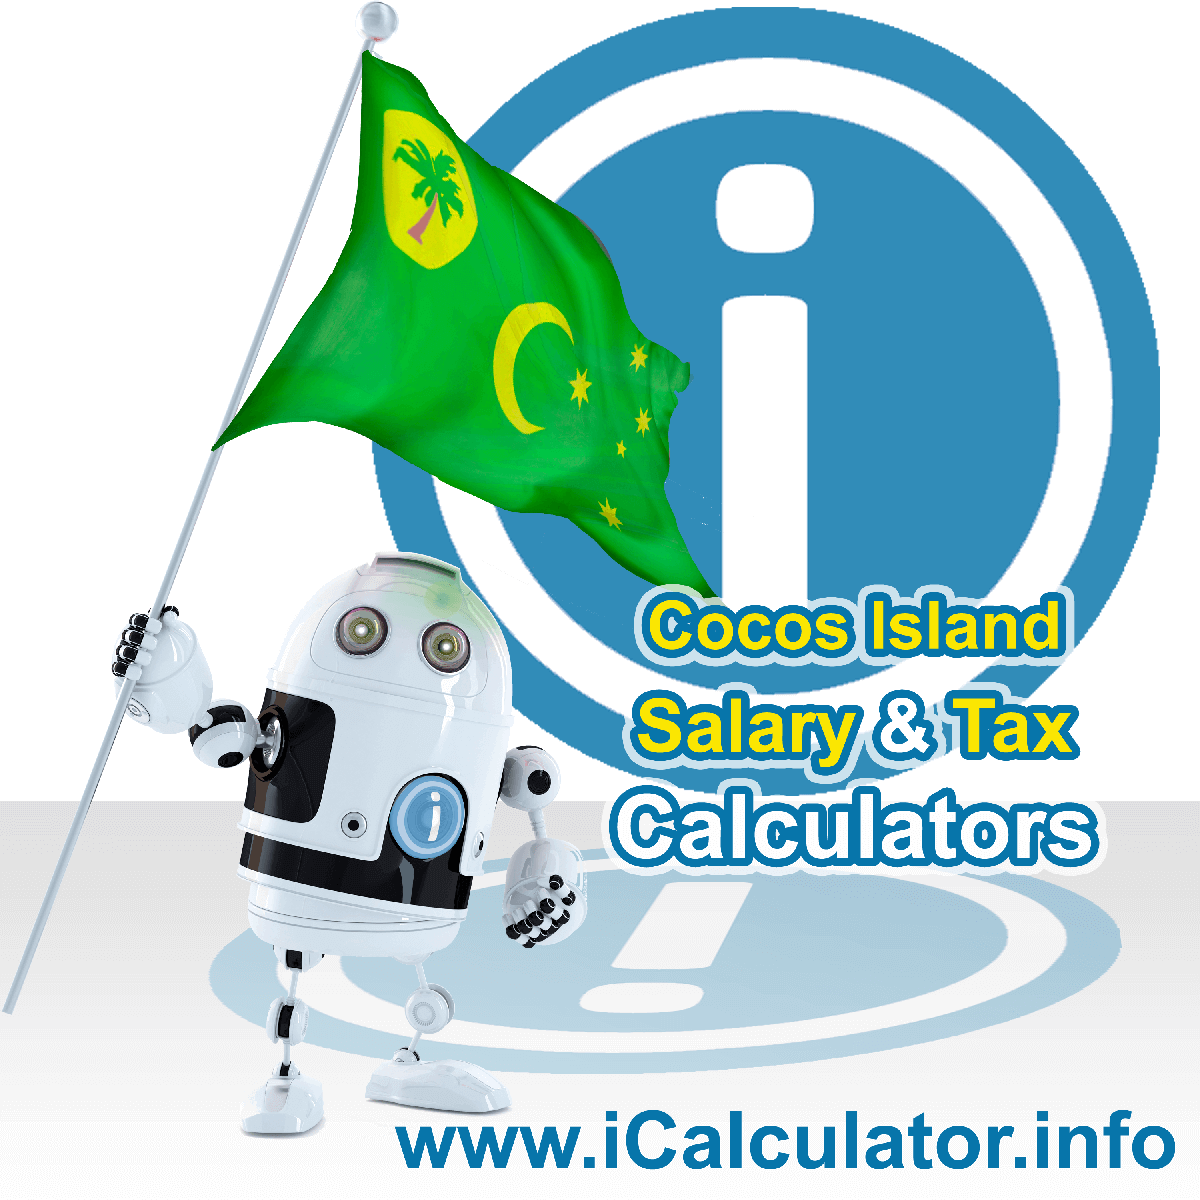 Cocos Islands Salary Calculator. This image shows the Cocos Islandsese flag and information relating to the tax formula for the Cocos Islands Tax Calculator